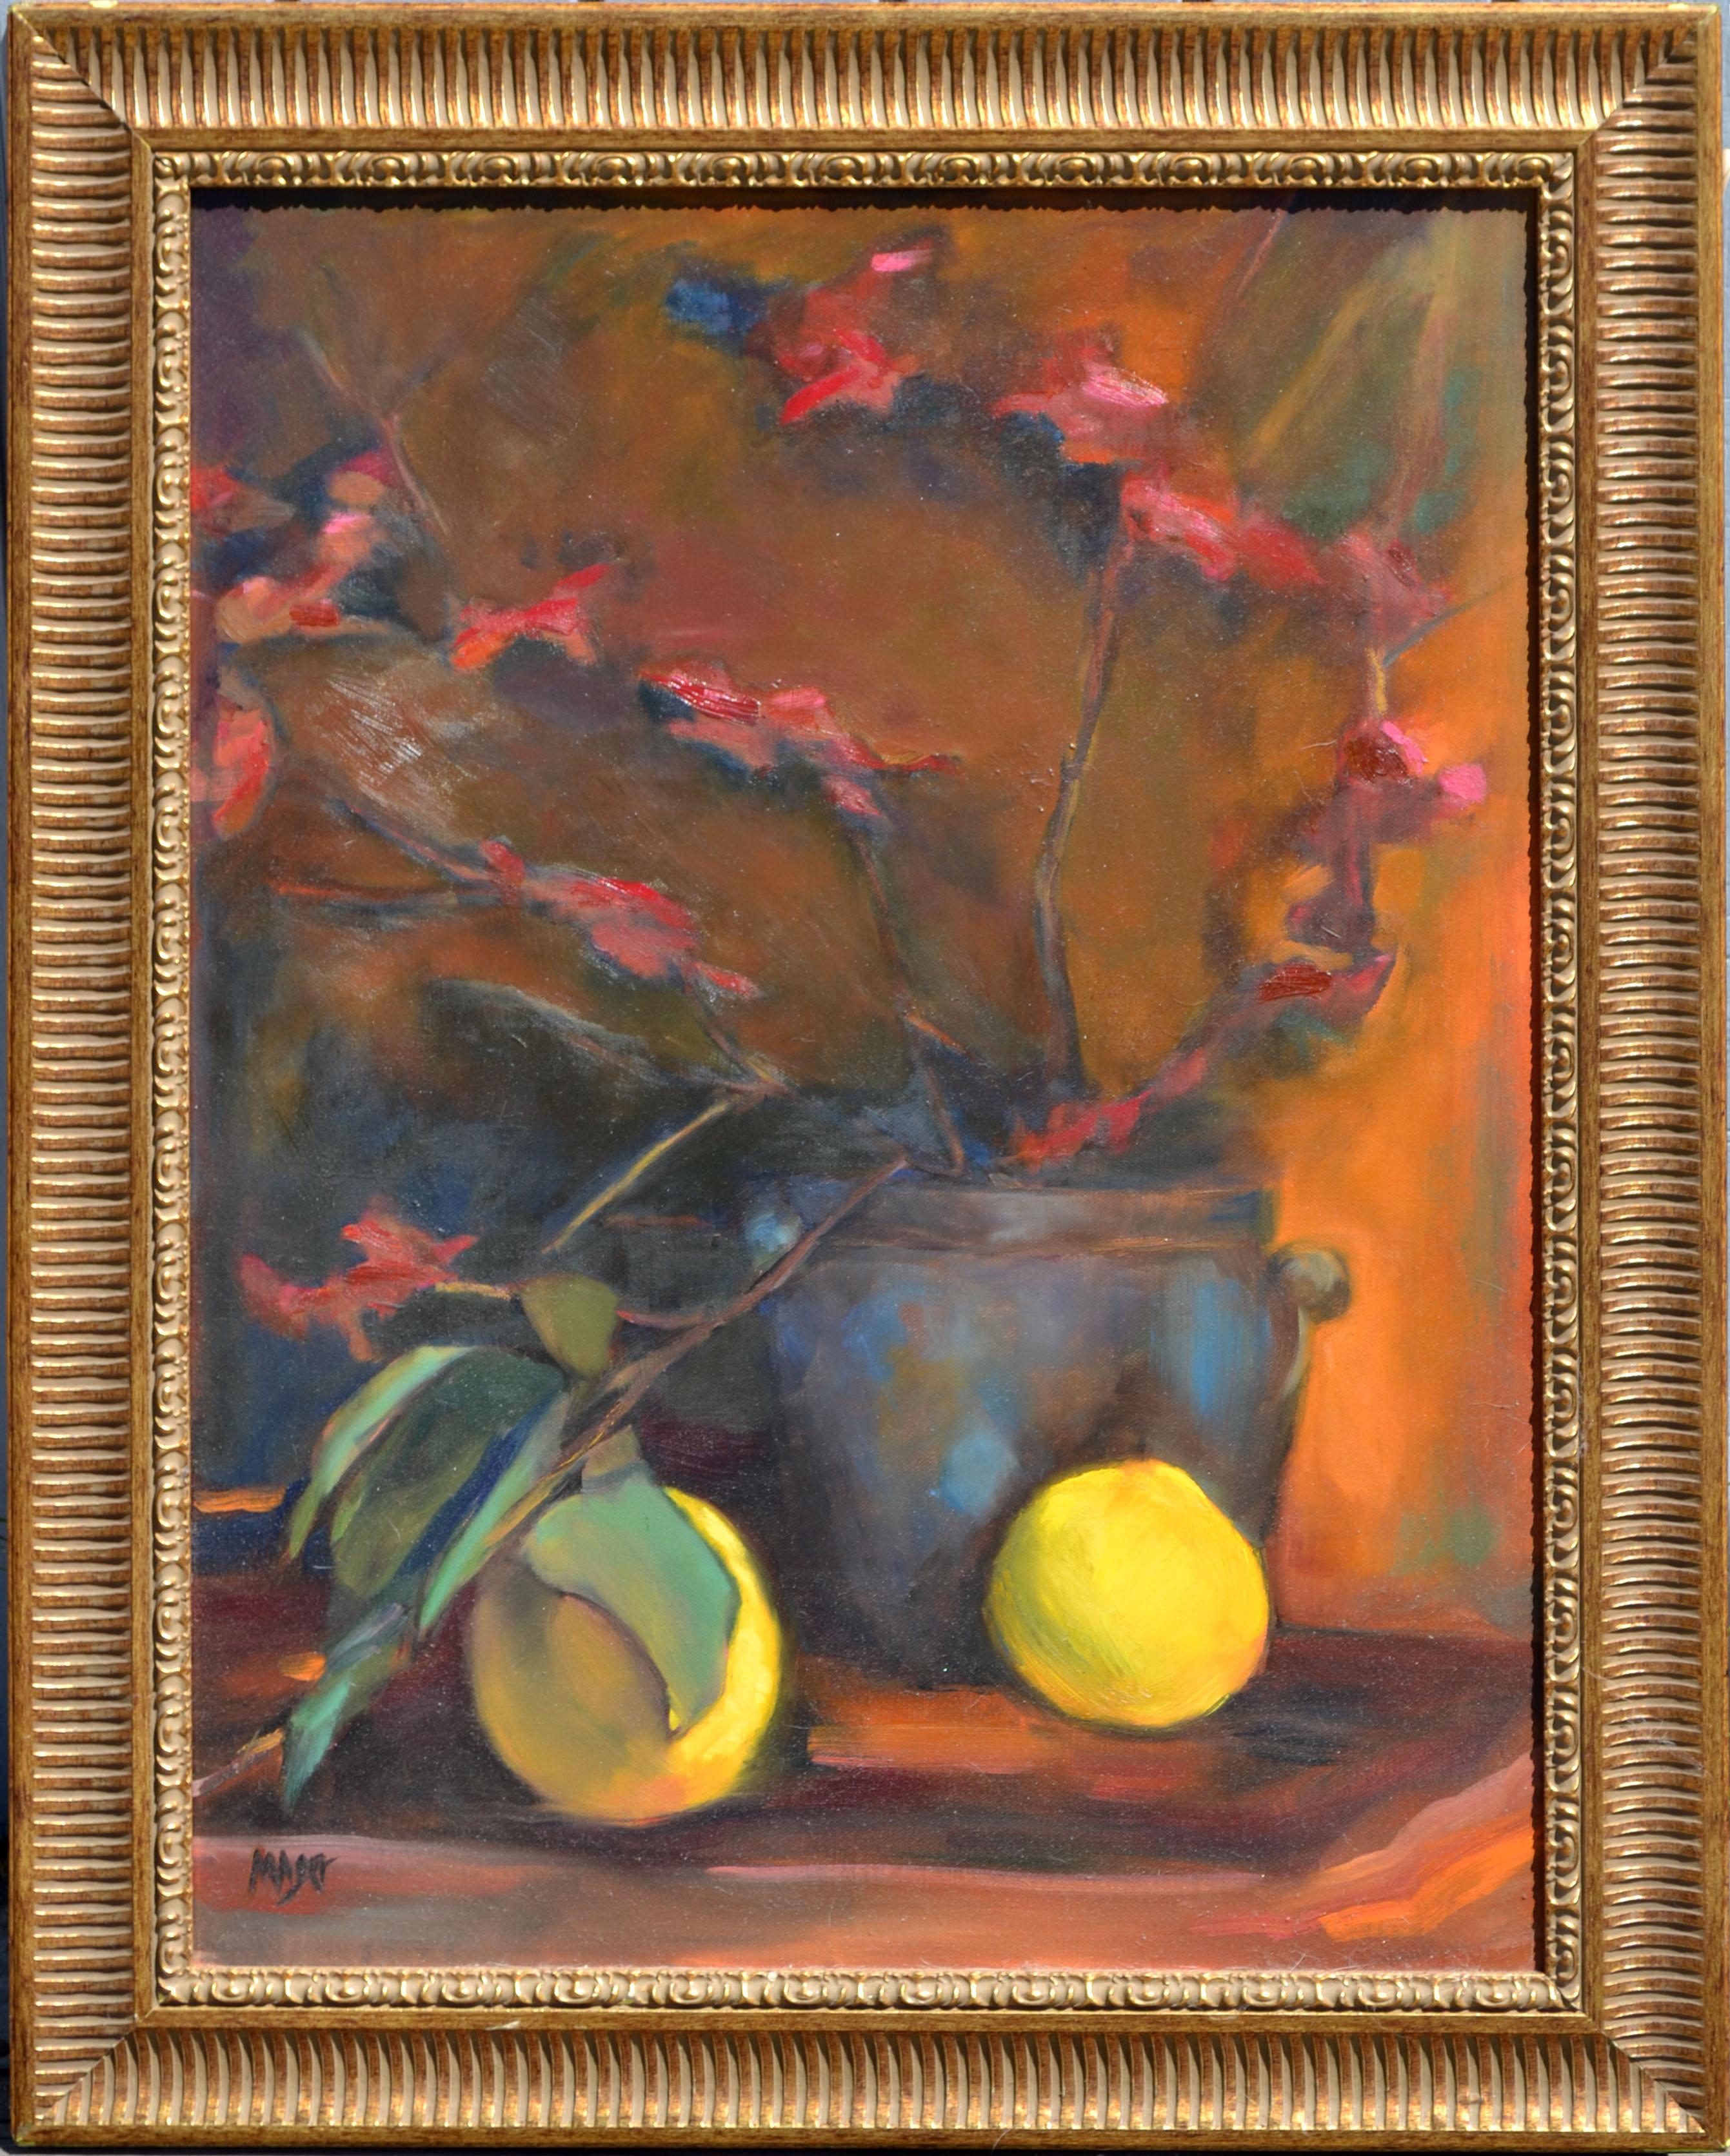 Beautiful oil painting still life of two lemons sitting on a table in front of a red orchid by Maier (American). Signed "Maier" lower left. Giltwood frame. Image: 18"L x 24"H. 

